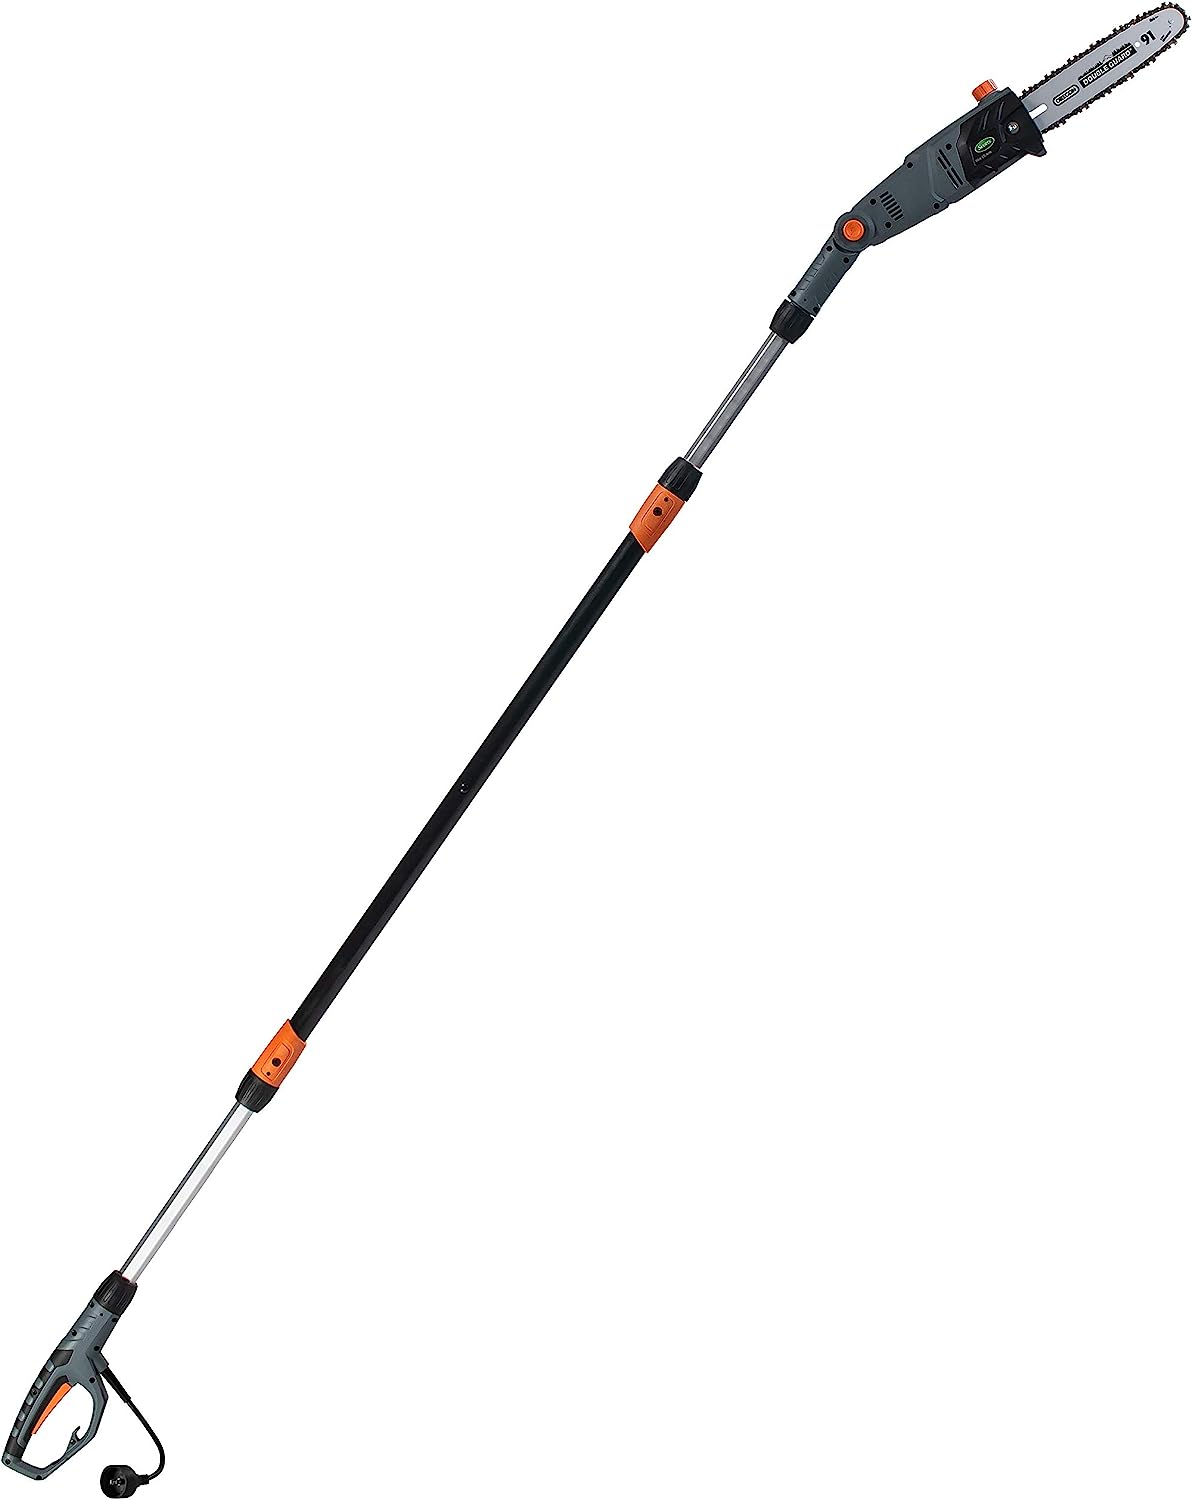 pole pruner chainsaw review